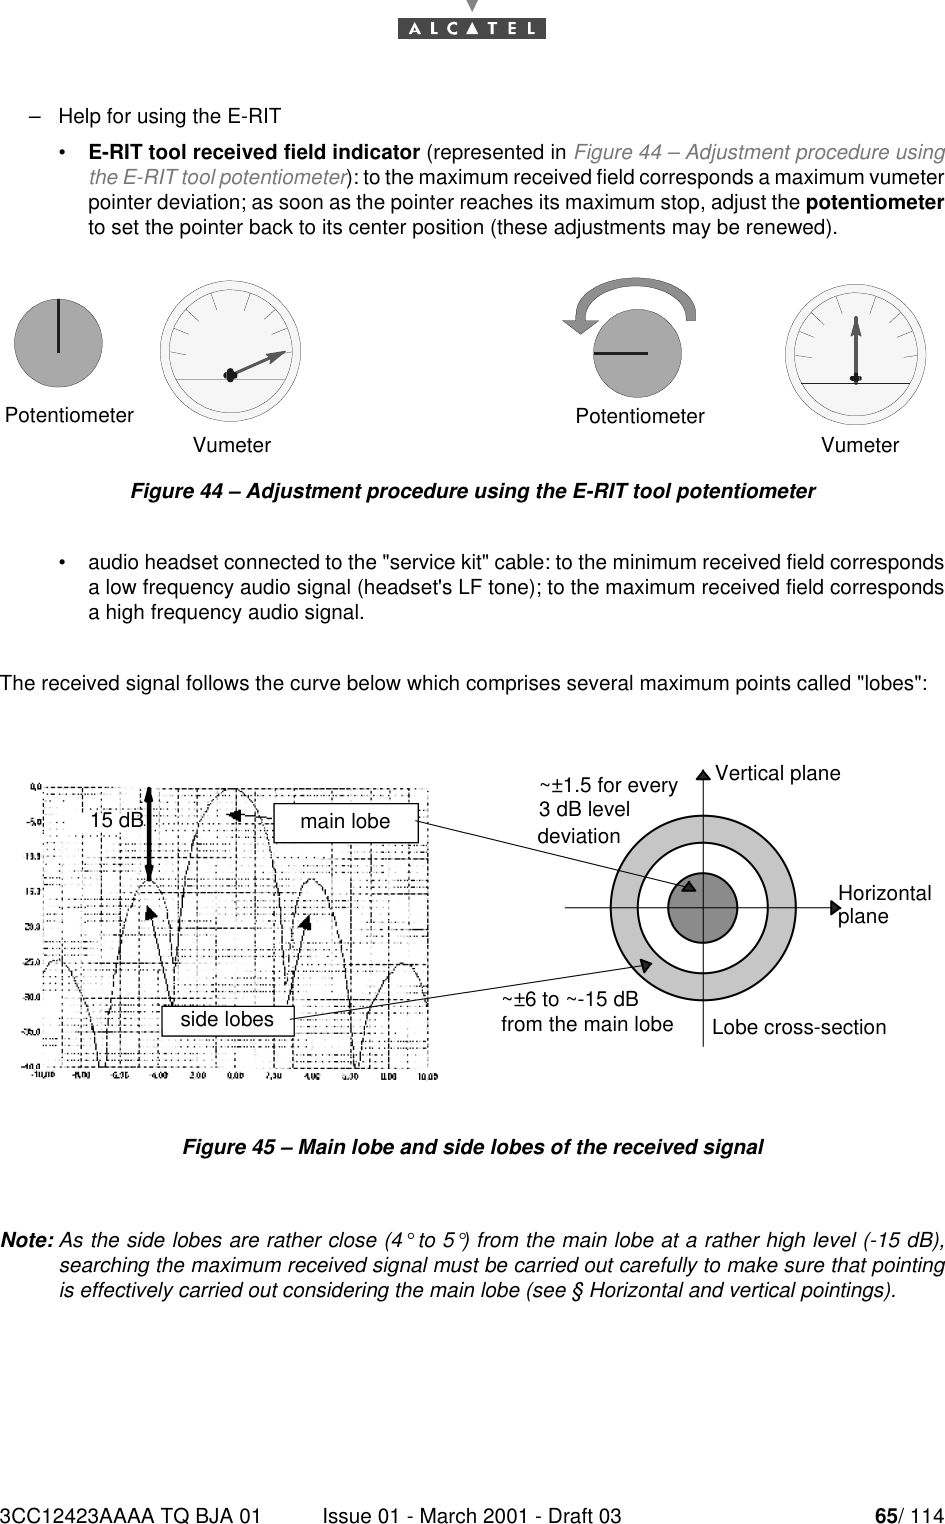 3CC12423AAAA TQ BJA 01 Issue 01 - March 2001 - Draft 03 65/ 11478–Help for using the E-RIT•E-RIT tool received field indicator (represented in Figure 44 – Adjustment procedure usingthe E-RIT tool potentiometer): to the maximum received field corresponds a maximum vumeterpointer deviation; as soon as the pointer reaches its maximum stop, adjust the potentiometerto set the pointer back to its center position (these adjustments may be renewed).Figure 44 – Adjustment procedure using the E-RIT tool potentiometer  •audio headset connected to the &quot;service kit&quot; cable: to the minimum received field correspondsa low frequency audio signal (headset&apos;s LF tone); to the maximum received field correspondsa high frequency audio signal.The received signal follows the curve below which comprises several maximum points called &quot;lobes&quot;:Figure 45 – Main lobe and side lobes of the received signalNote: As the side lobes are rather close (4° to 5°) from the main lobe at a rather high level (-15 dB),searching the maximum received signal must be carried out carefully to make sure that pointingis effectively carried out considering the main lobe (see § Horizontal and vertical pointings).PotentiometerVumeter VumeterPotentiometer15 dBside lobesmain lobeVertical planeLobe cross-sectionHorizontal~±1.5 for every~±6 to ~-15 dB3 dB leveldeviationfrom the main lobeplane